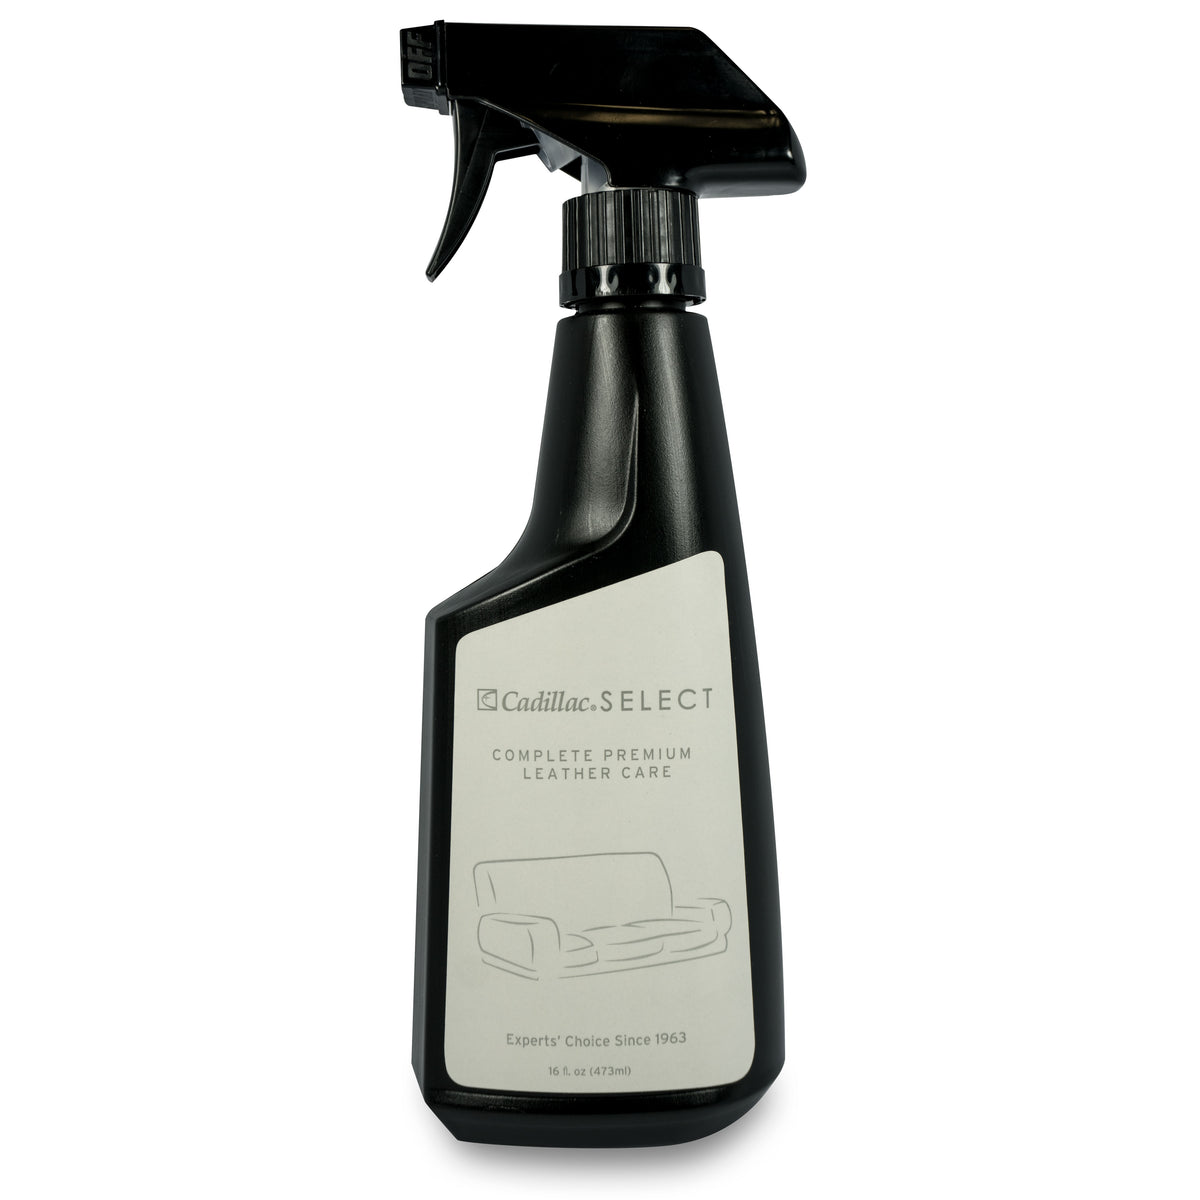 Cadillac Select Premium Leather Cleaner 4 oz - Great for Shoes, Handbags,  Jac